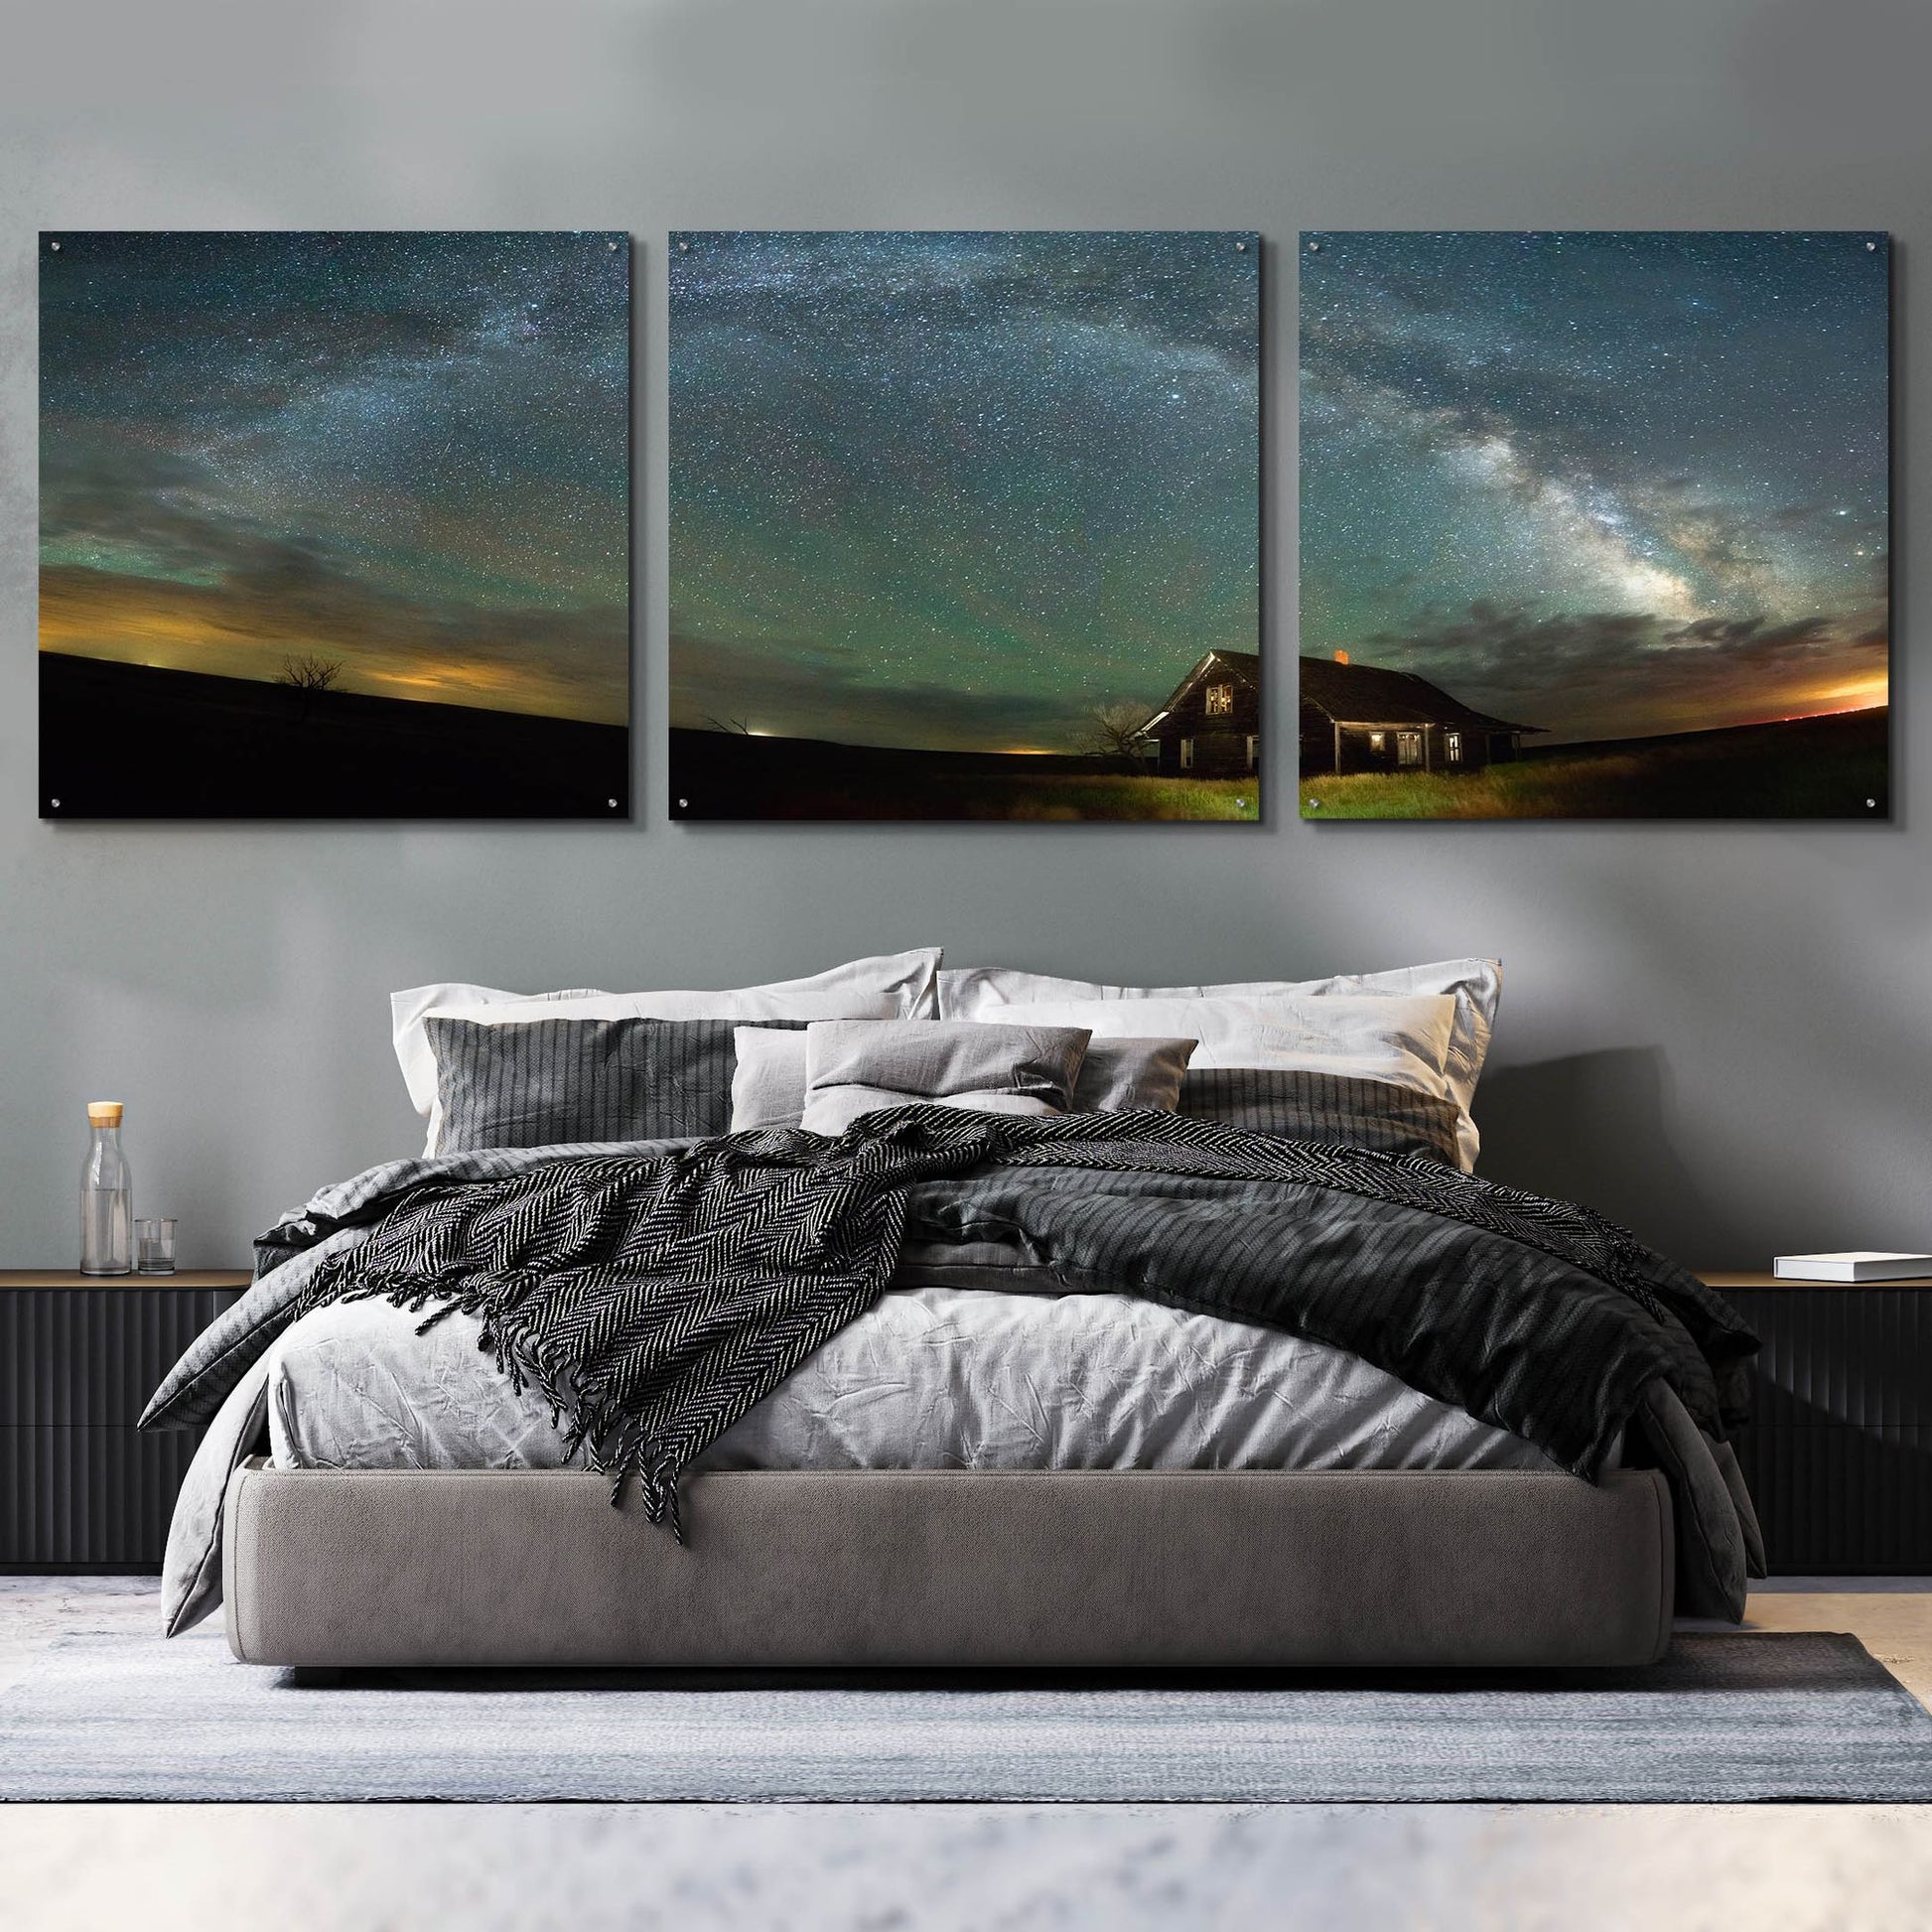 Epic Art 'Abandoned on the Plains' by Darren White, Acrylic Glass Wall Art, 3 Piece Set,108x36